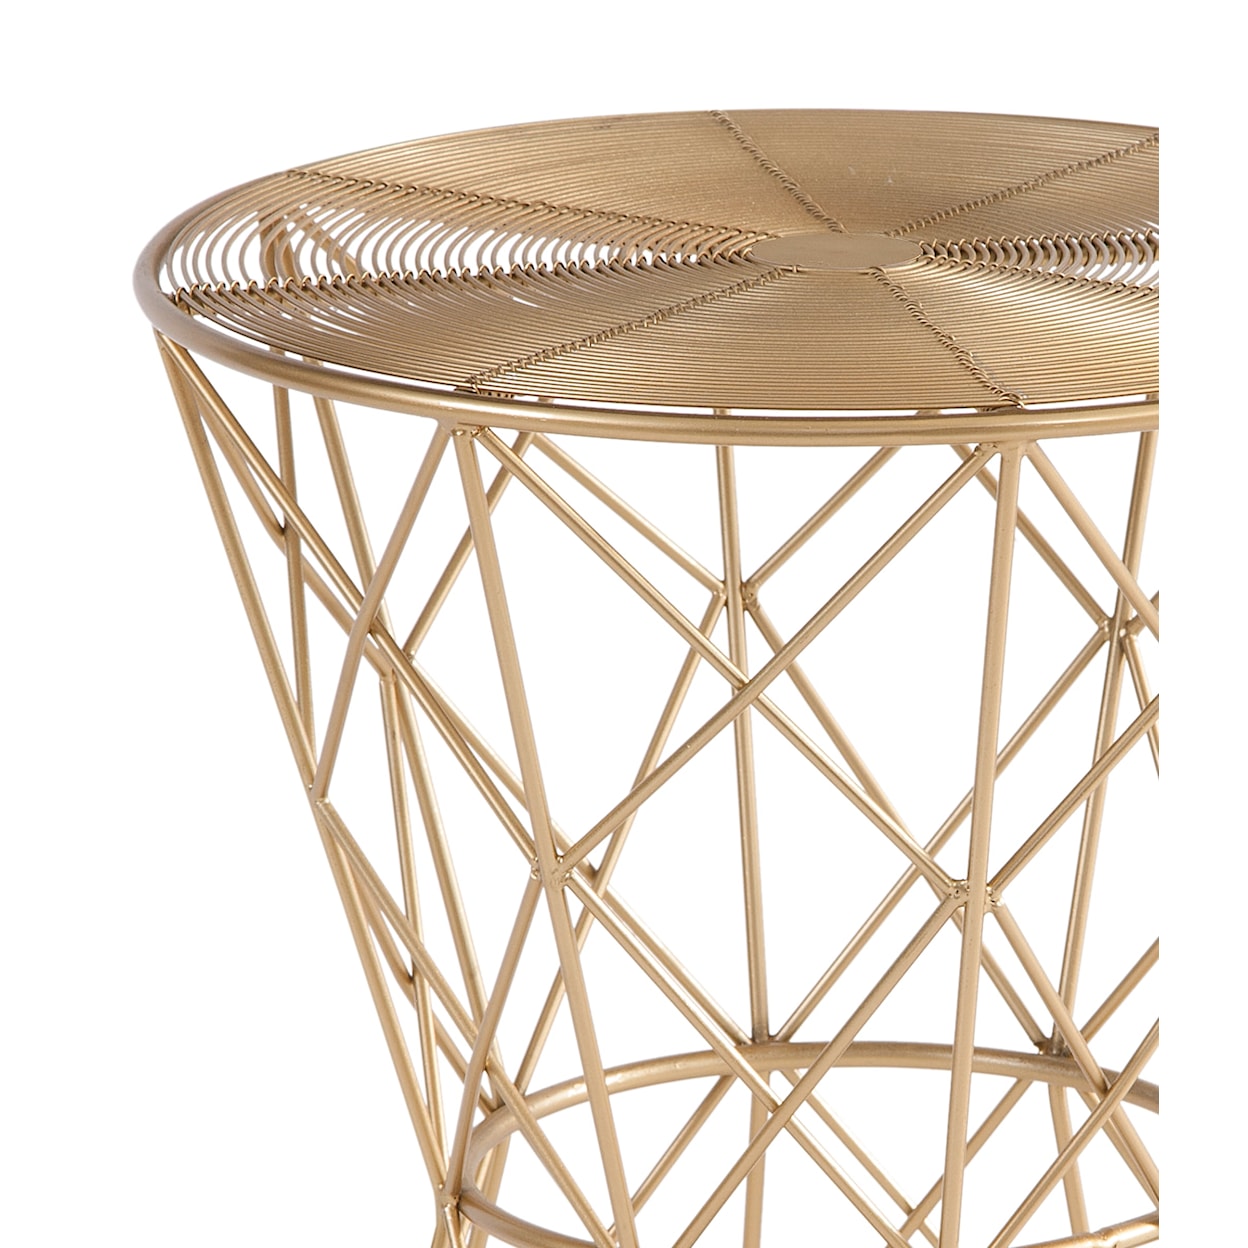 Bassett Mirror Accent Tables Sylvie Scatter Table